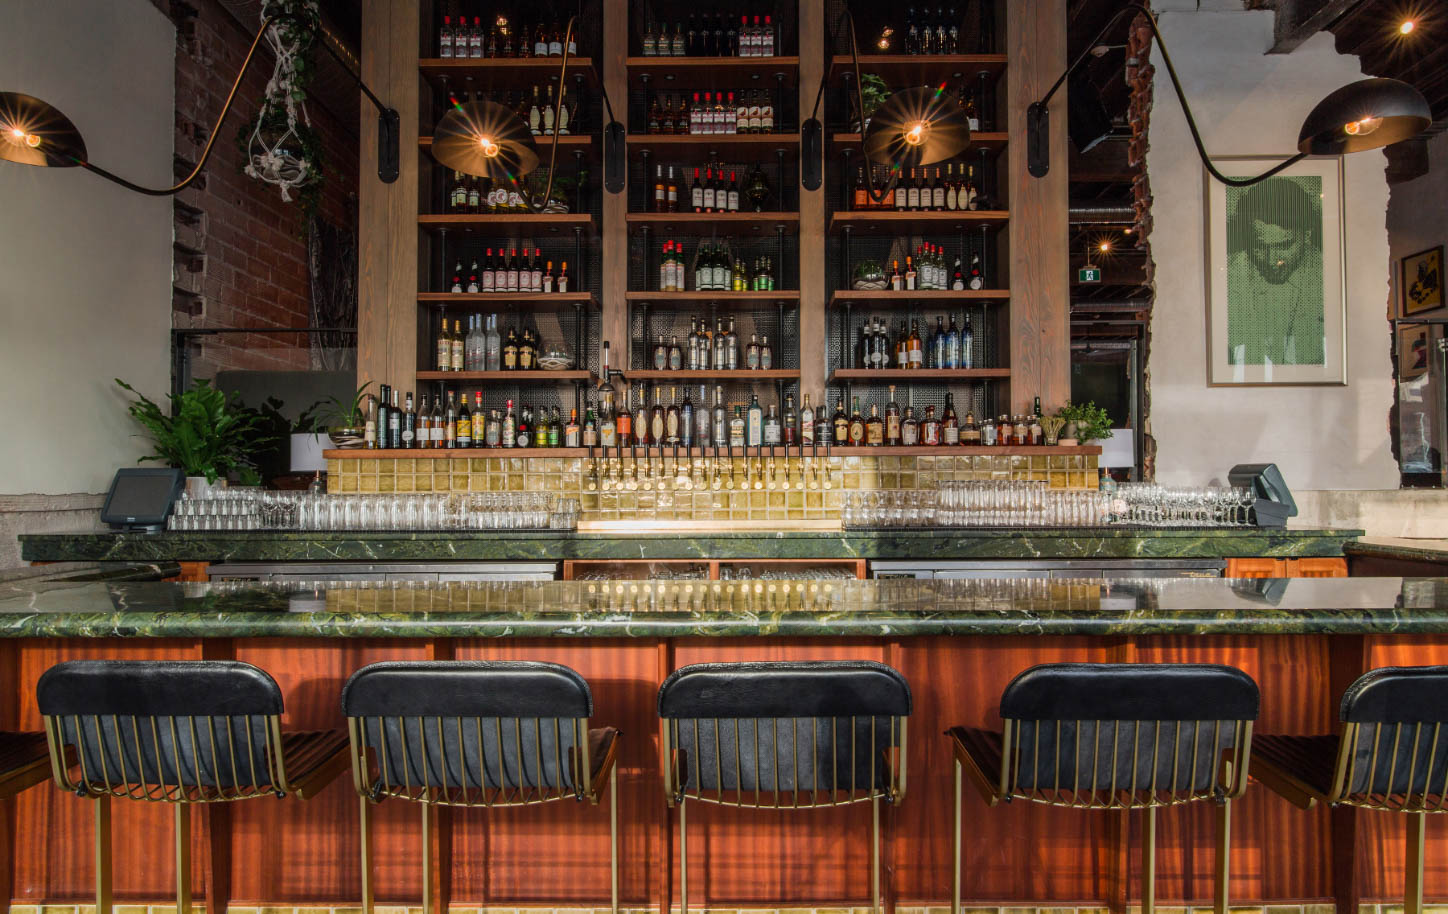 Gold and black bar chairs facing a green bar with a tall liquor wall in background